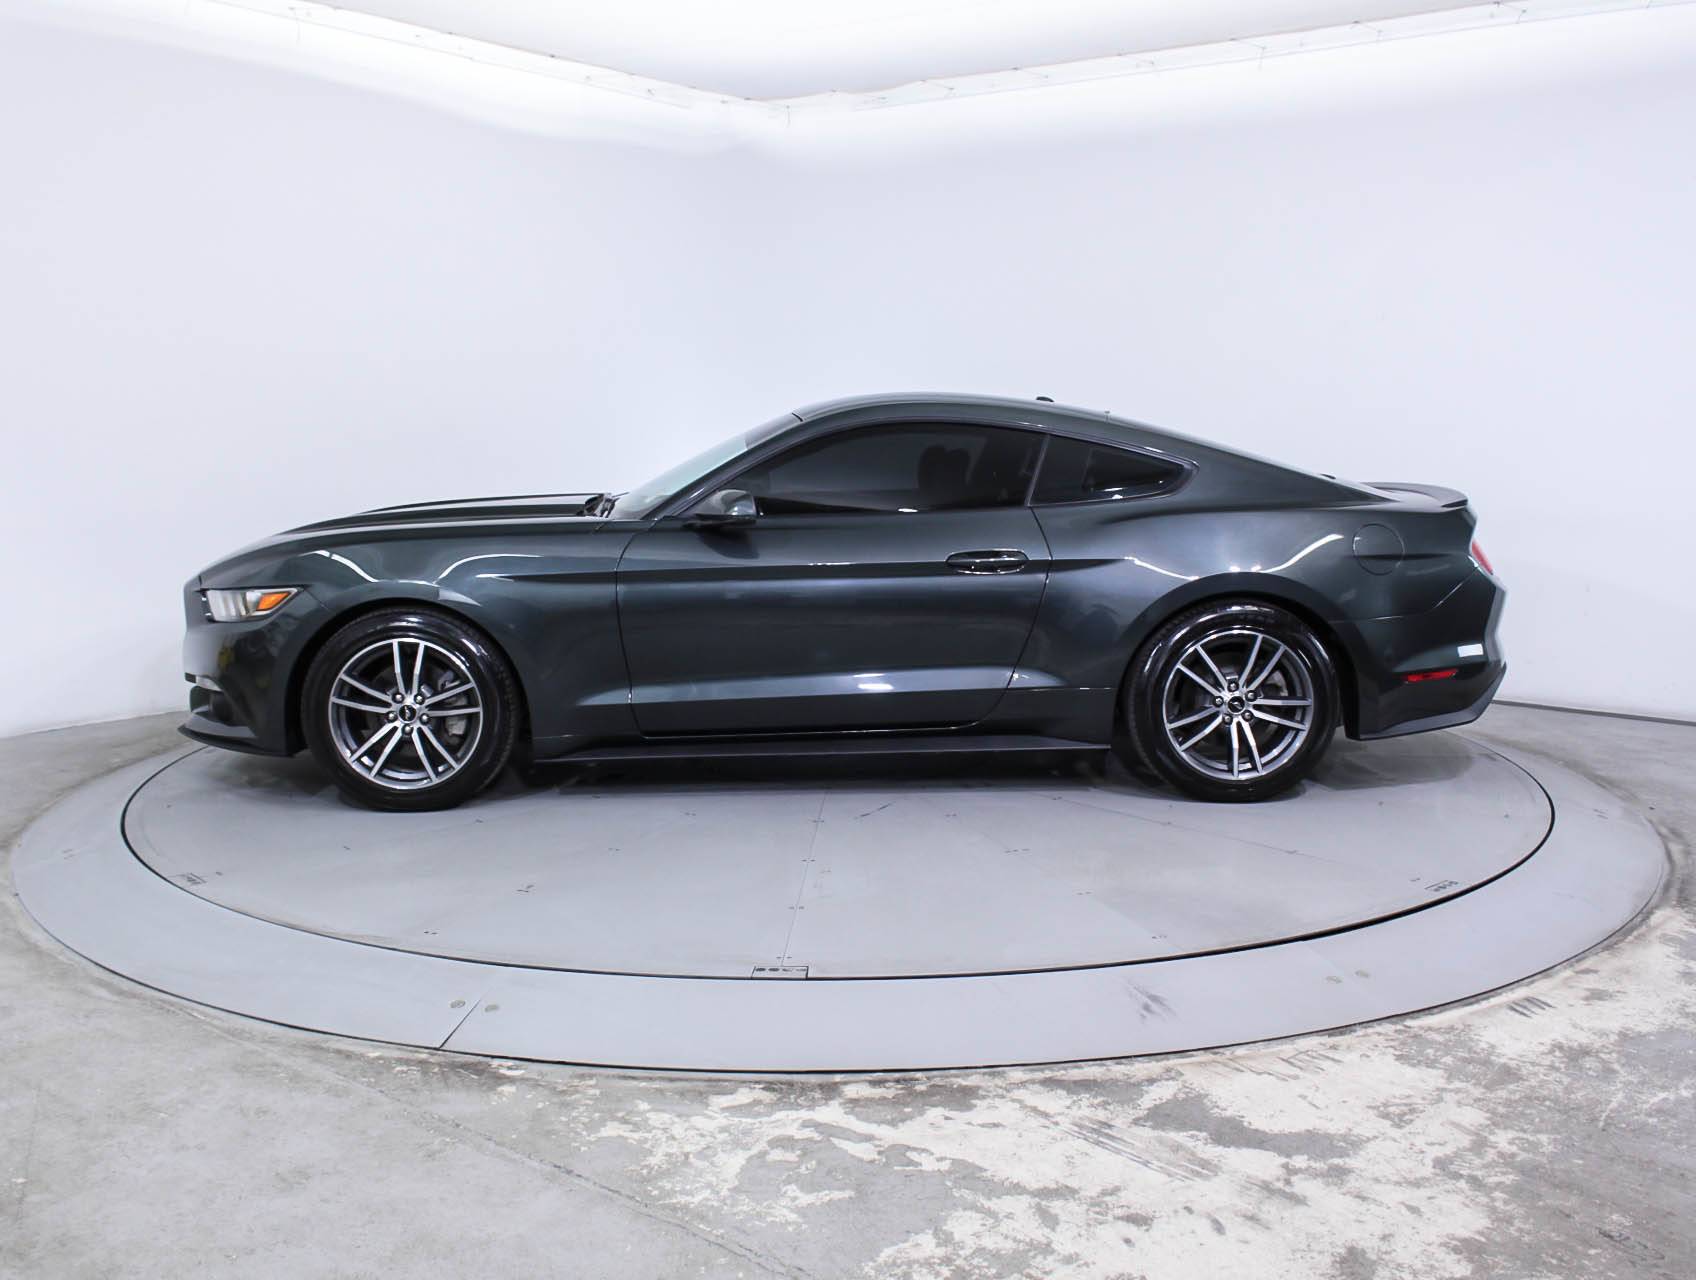 Florida Fine Cars - Used FORD MUSTANG 2015 HOLLYWOOD Ecoboost Premium